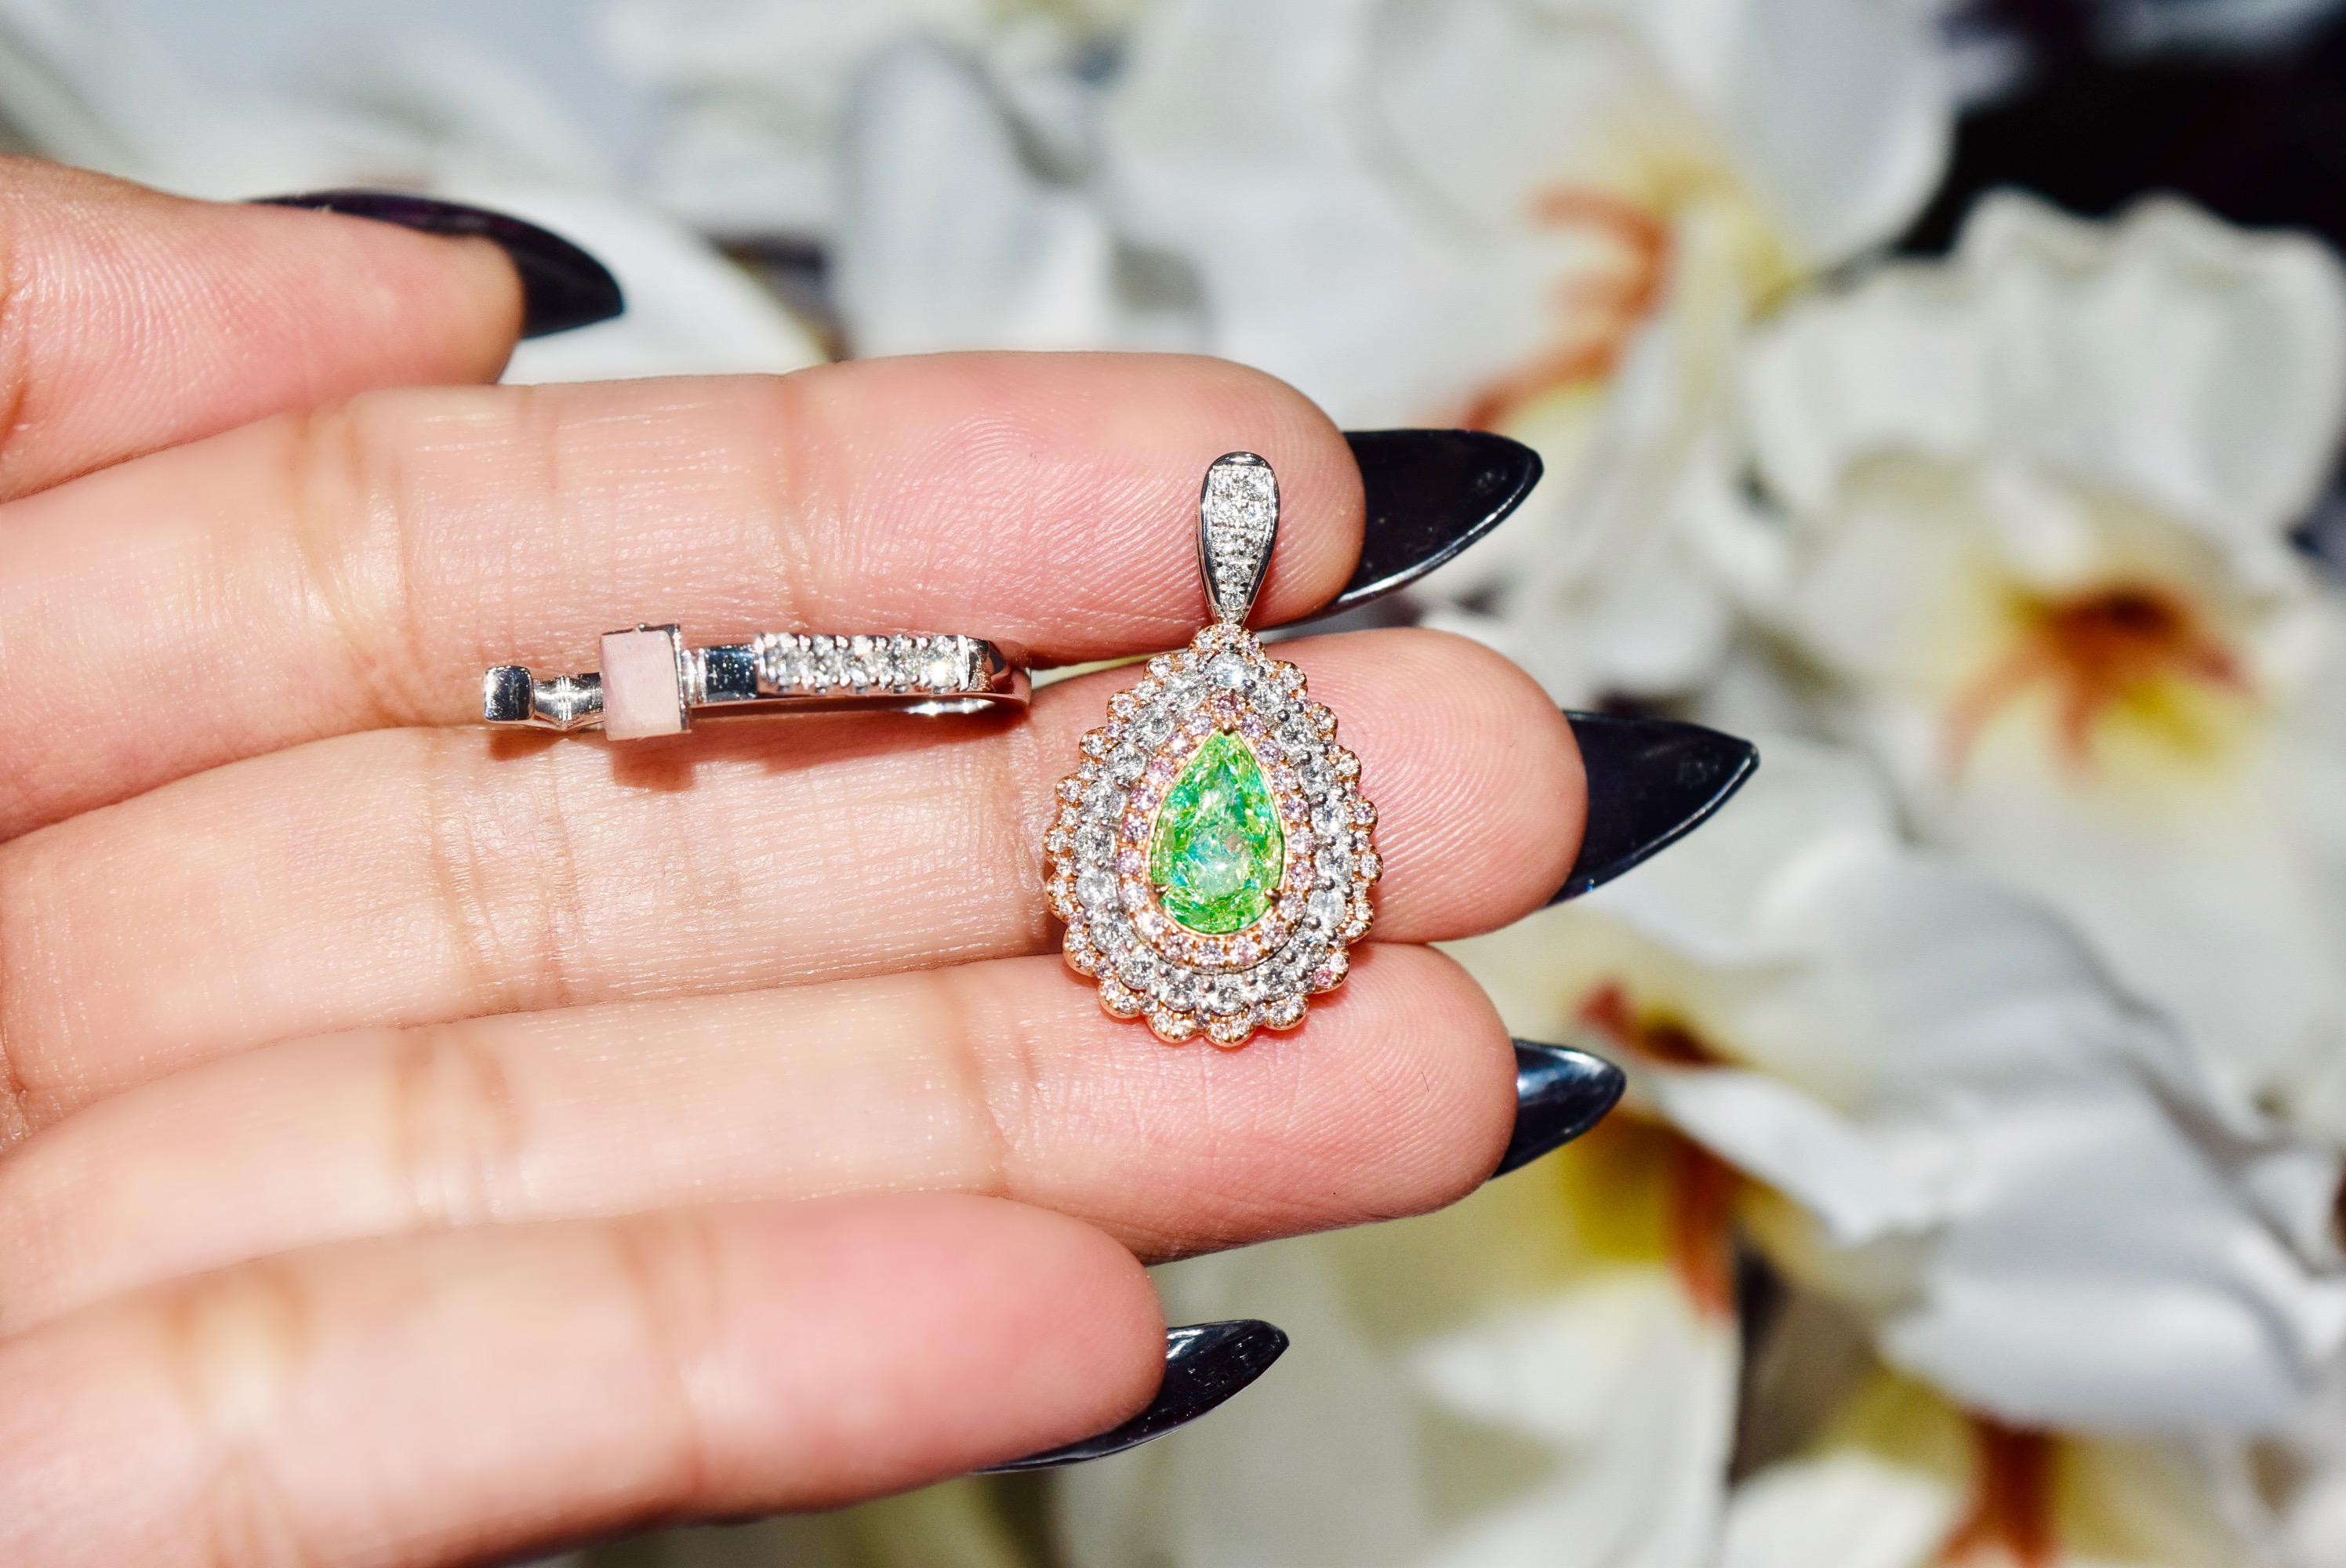 **100% NATURAL FANCY COLOUR DIAMOND JEWELLERIES**

✪ Jewelry Details ✪

♦ MAIN STONE DETAILS

➛ Stone Shape: Pear
➛ Stone Color: Fancy Light Greenish Yellow
➛ Stone Weight: 1.03 carat
➛ Clarity: I2
➛ GIA certified

♦ SIDE STONE DETAILS

➛ Side White